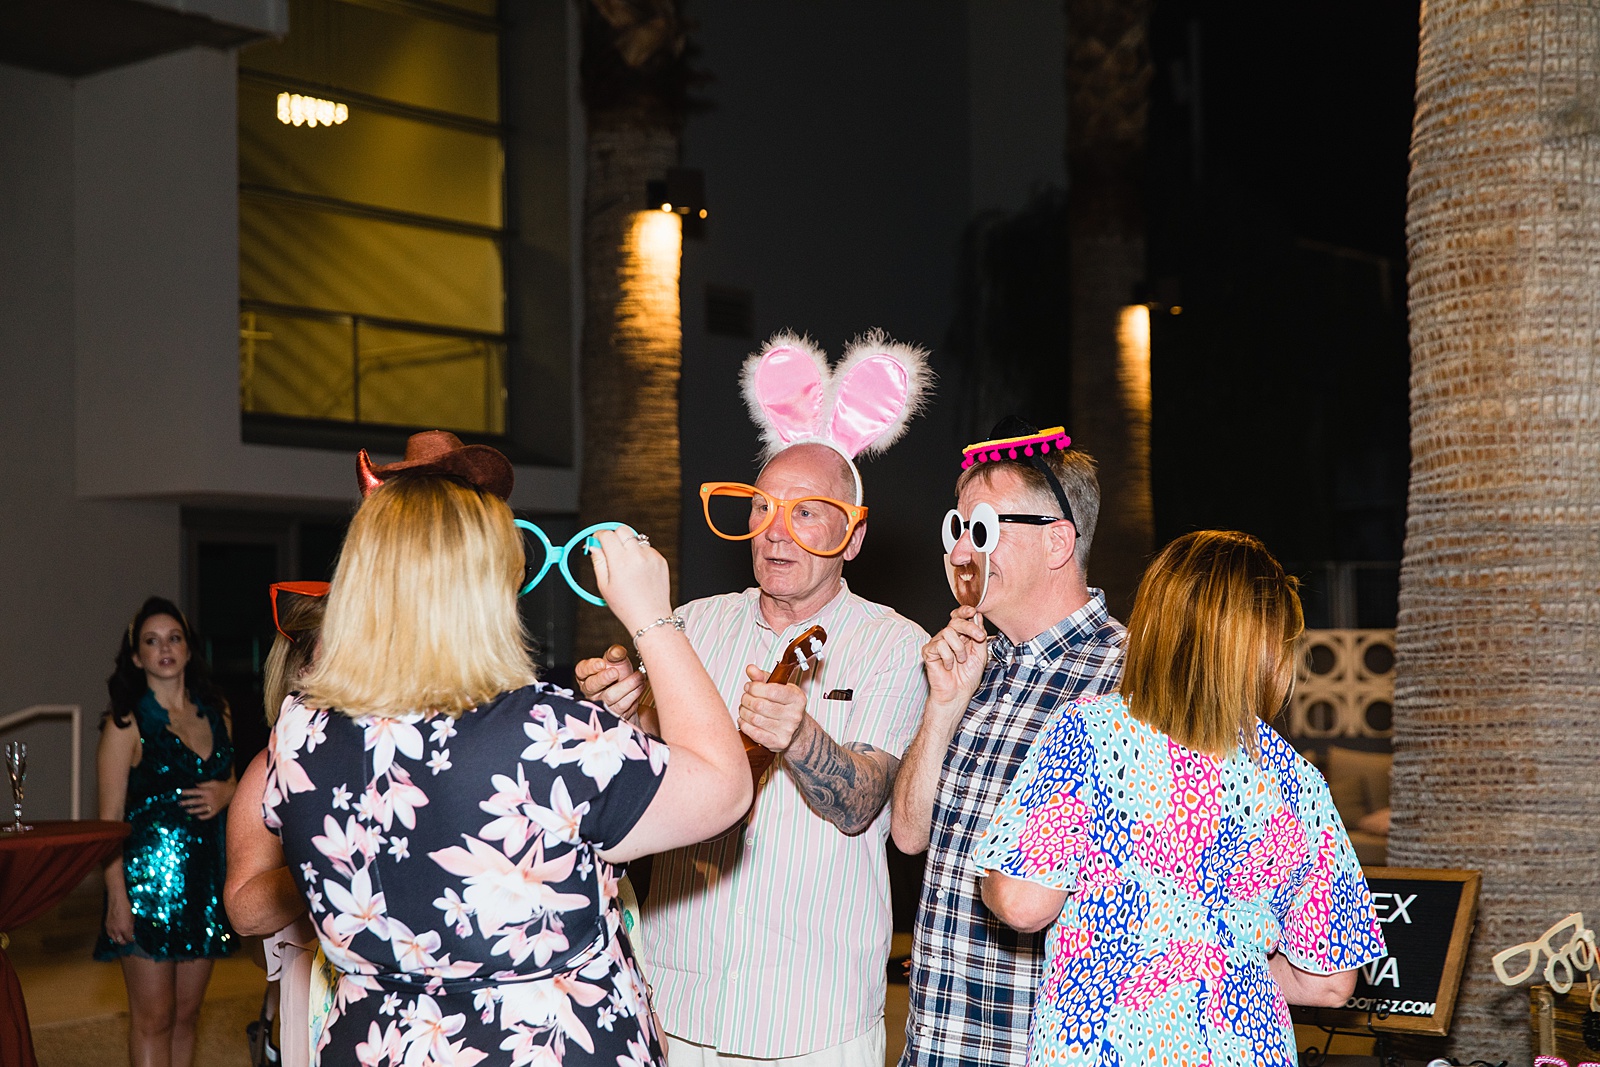 Guests take photos in retro VW Bus photo booth at Mountain Shadows Resort wedding reception by Paradise Valley wedding photographer PMA Photography